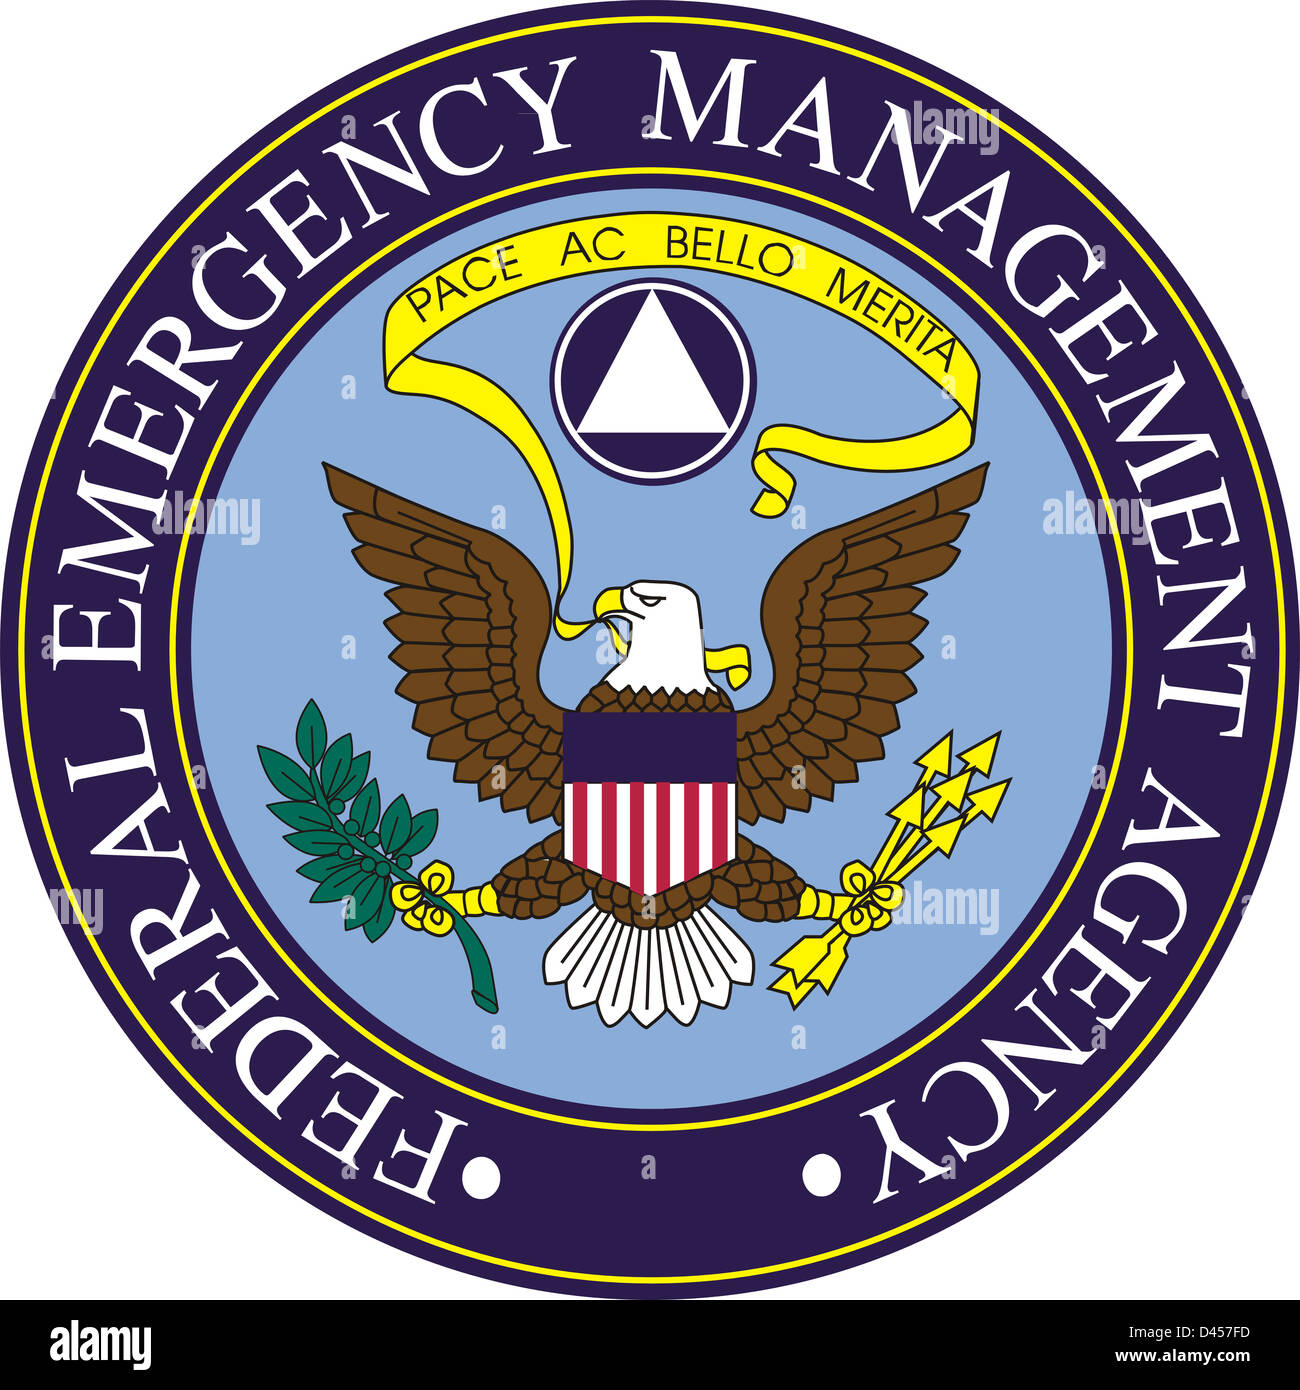 United States Federal Emergency Management Agency seal Stock Photo